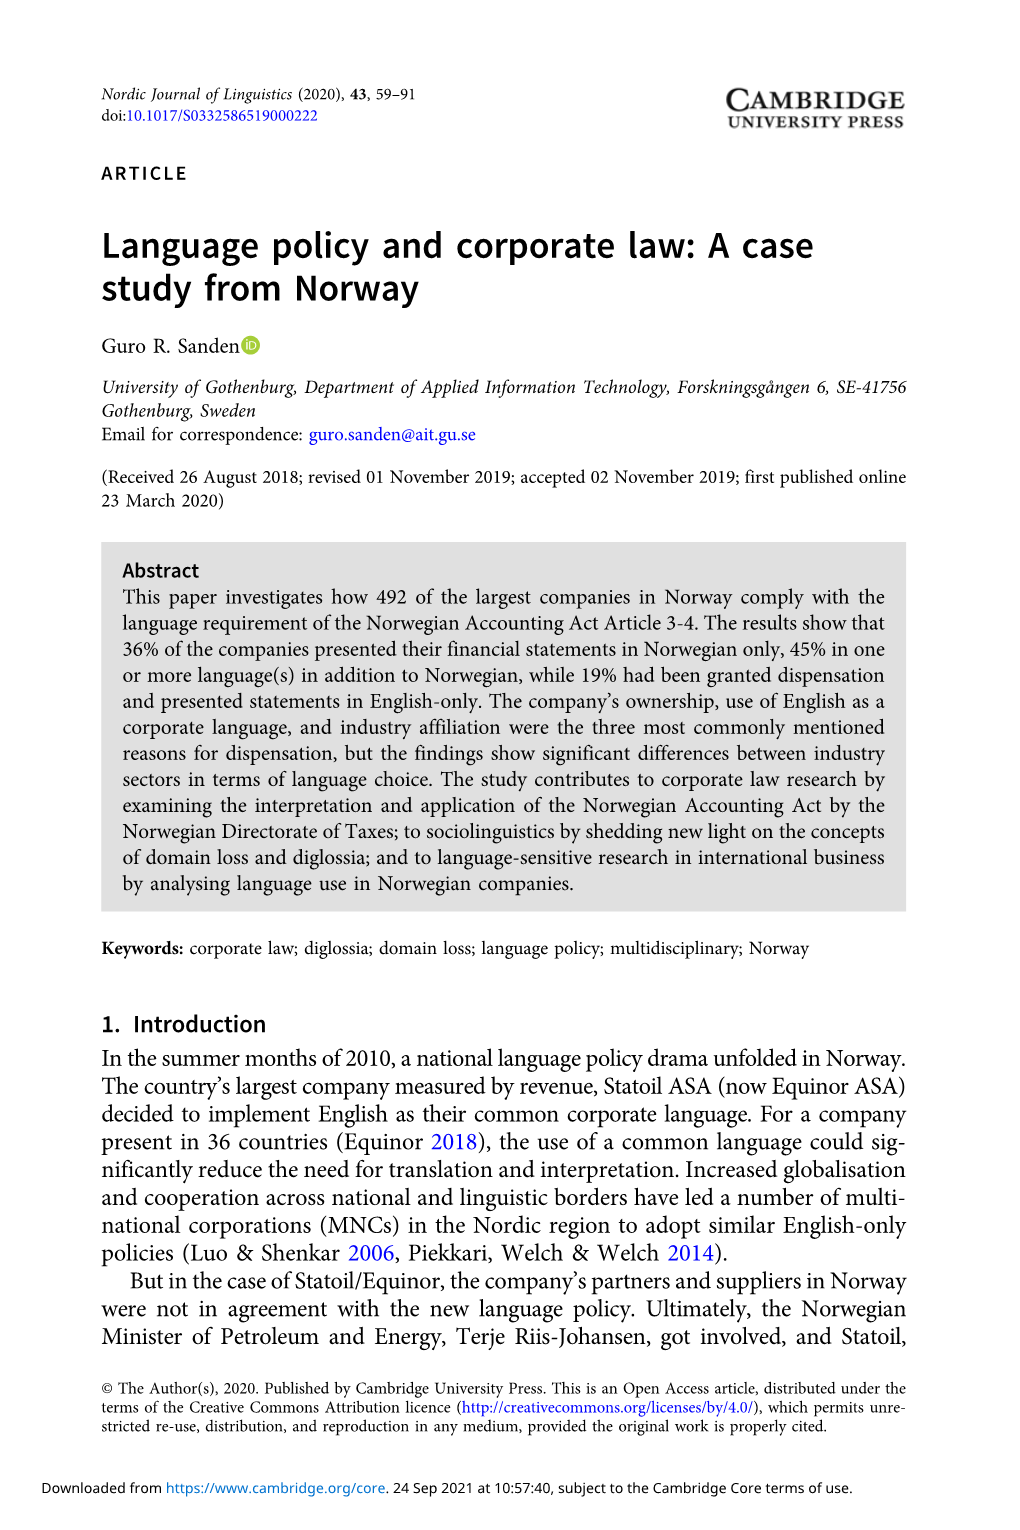 Language Policy and Corporate Law: a Case Study from Norway